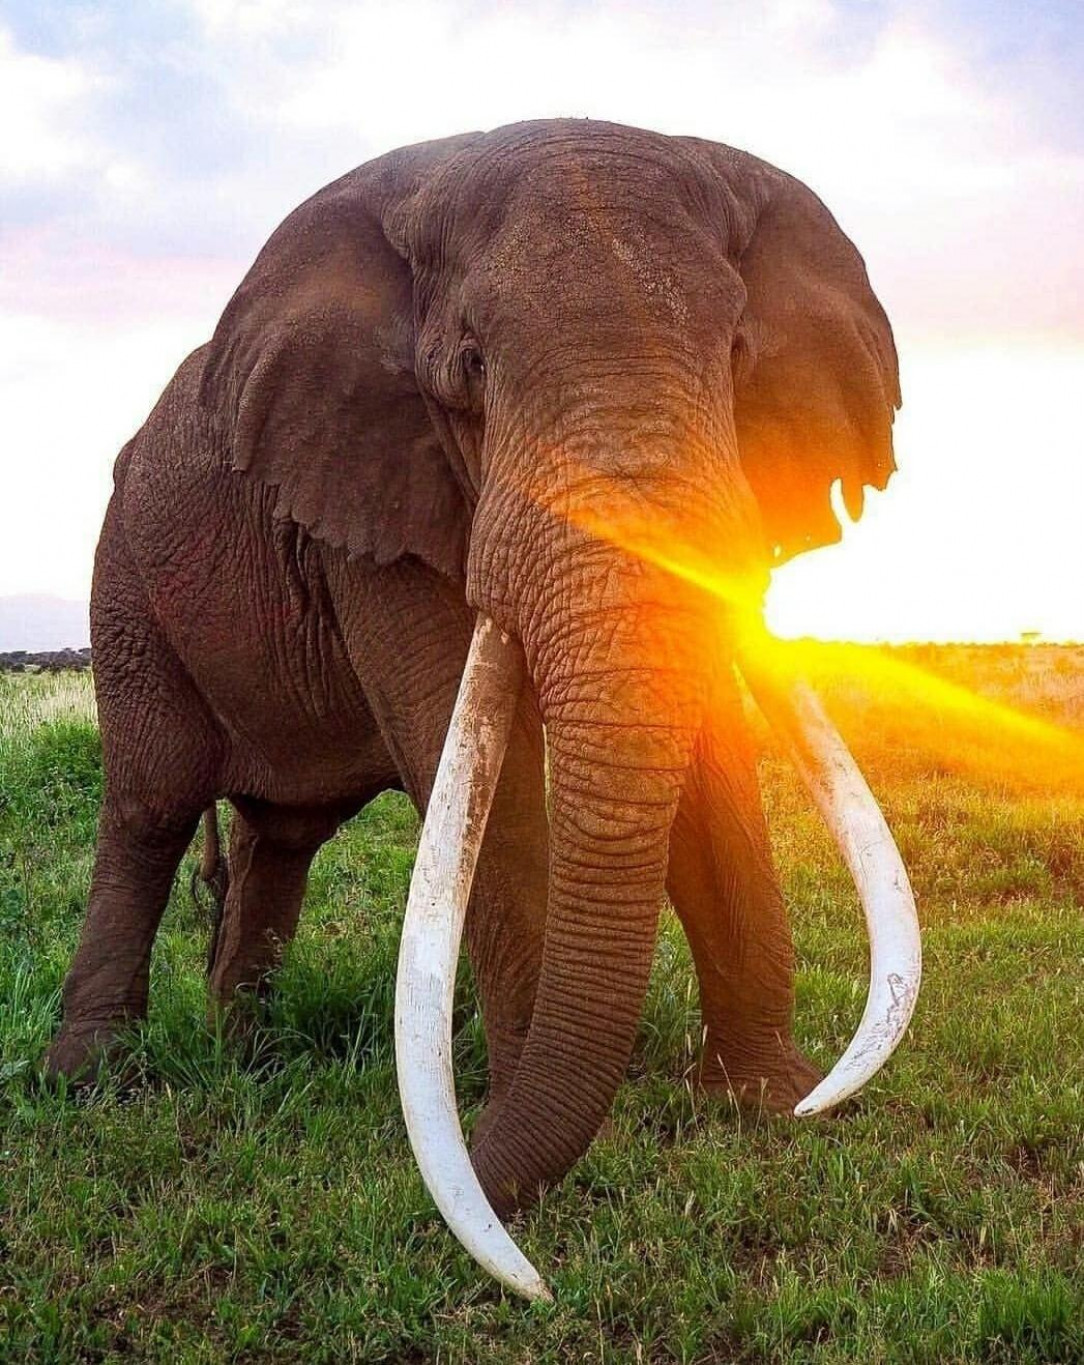 This perfect photo of this elephant with its tusks and the sun radiating 🐘